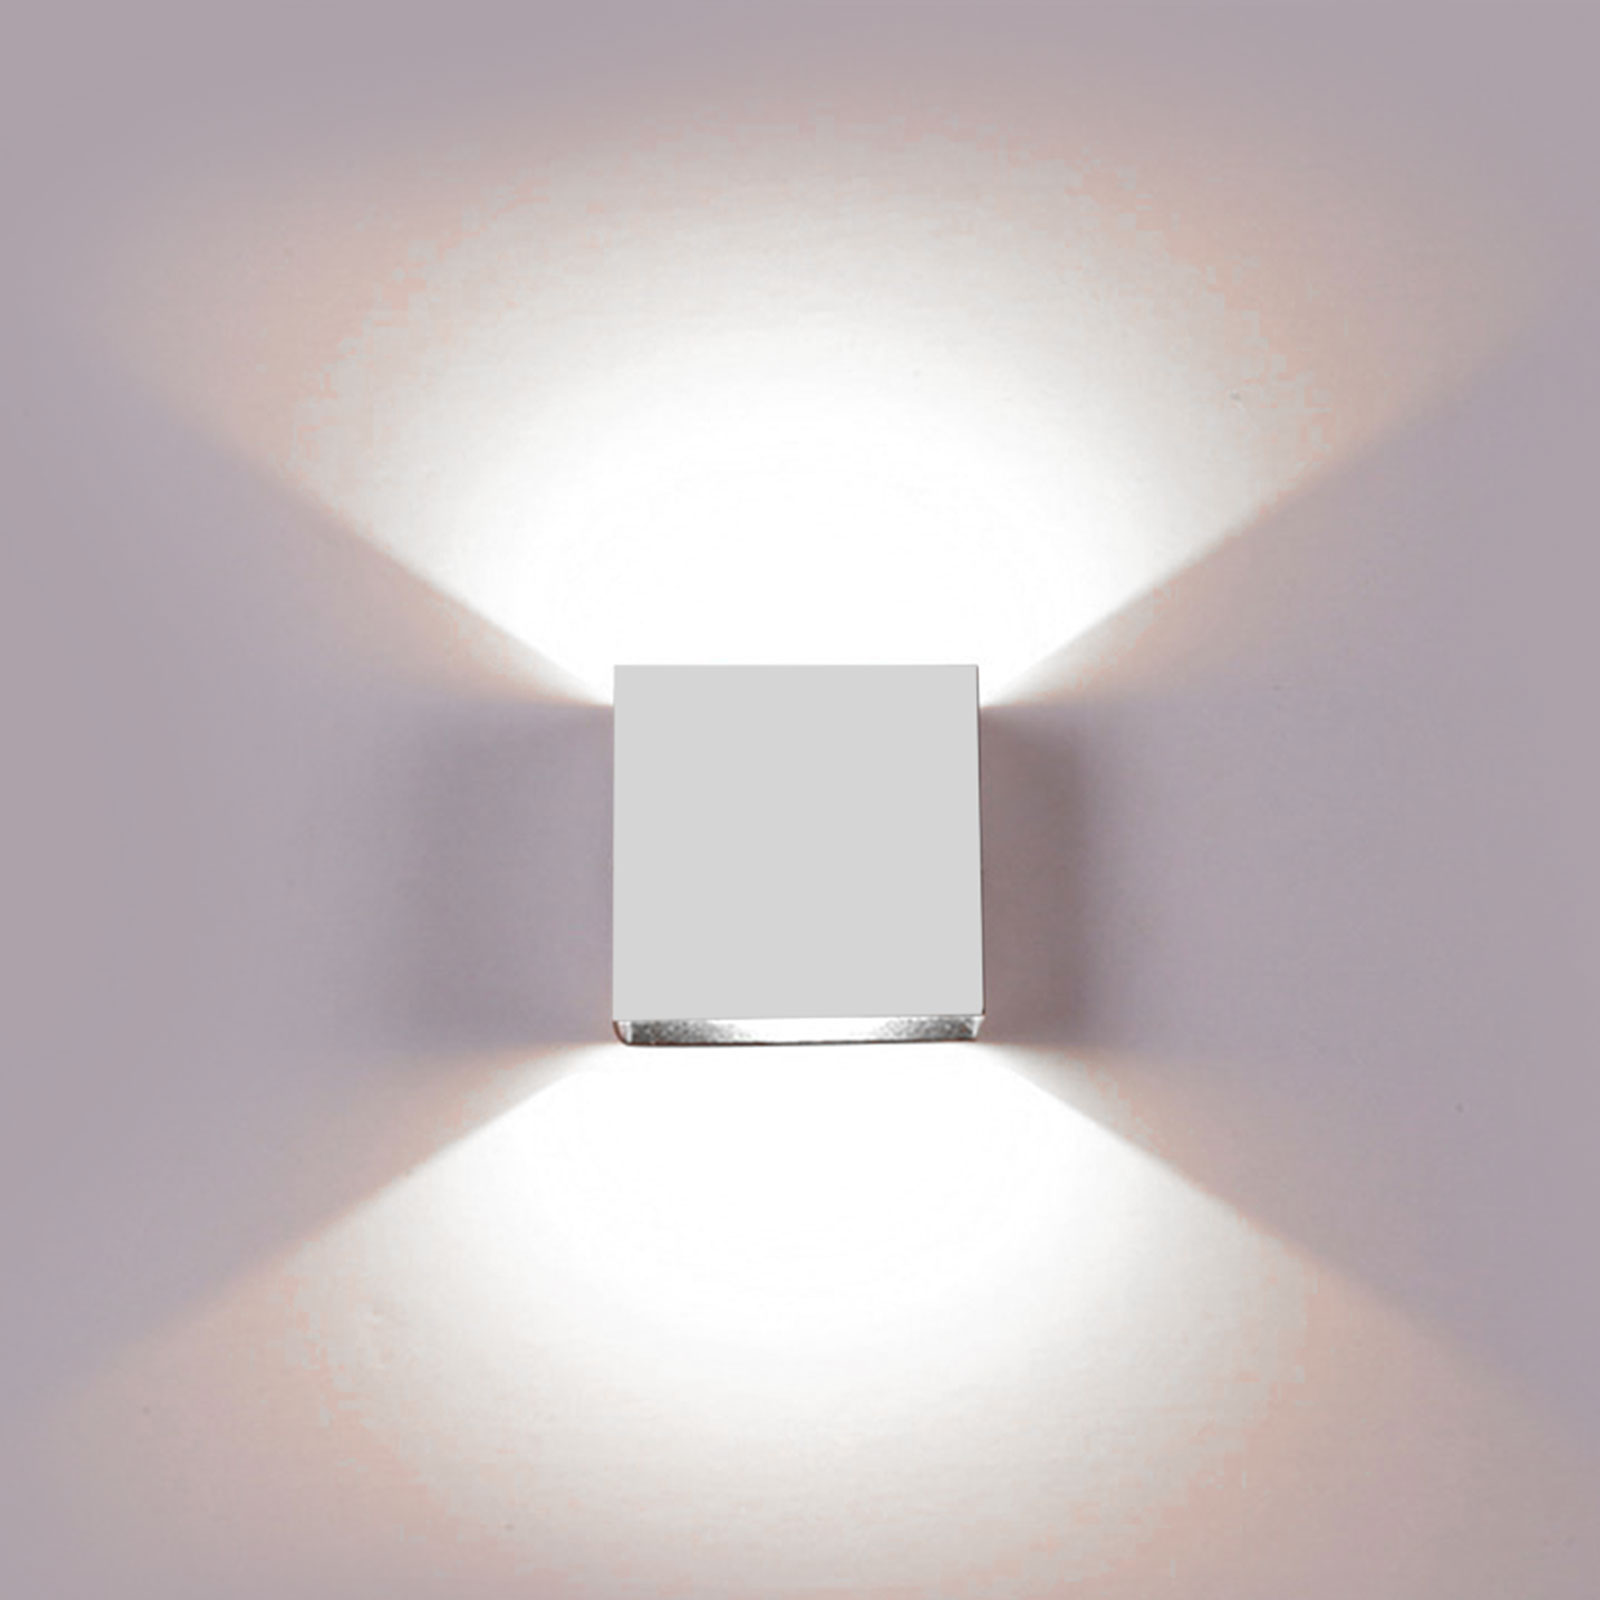 Details about   Modern 8W COB LED Wall Light Up Down Cube Indoor Outdoor Sconce Lighting Lamp 